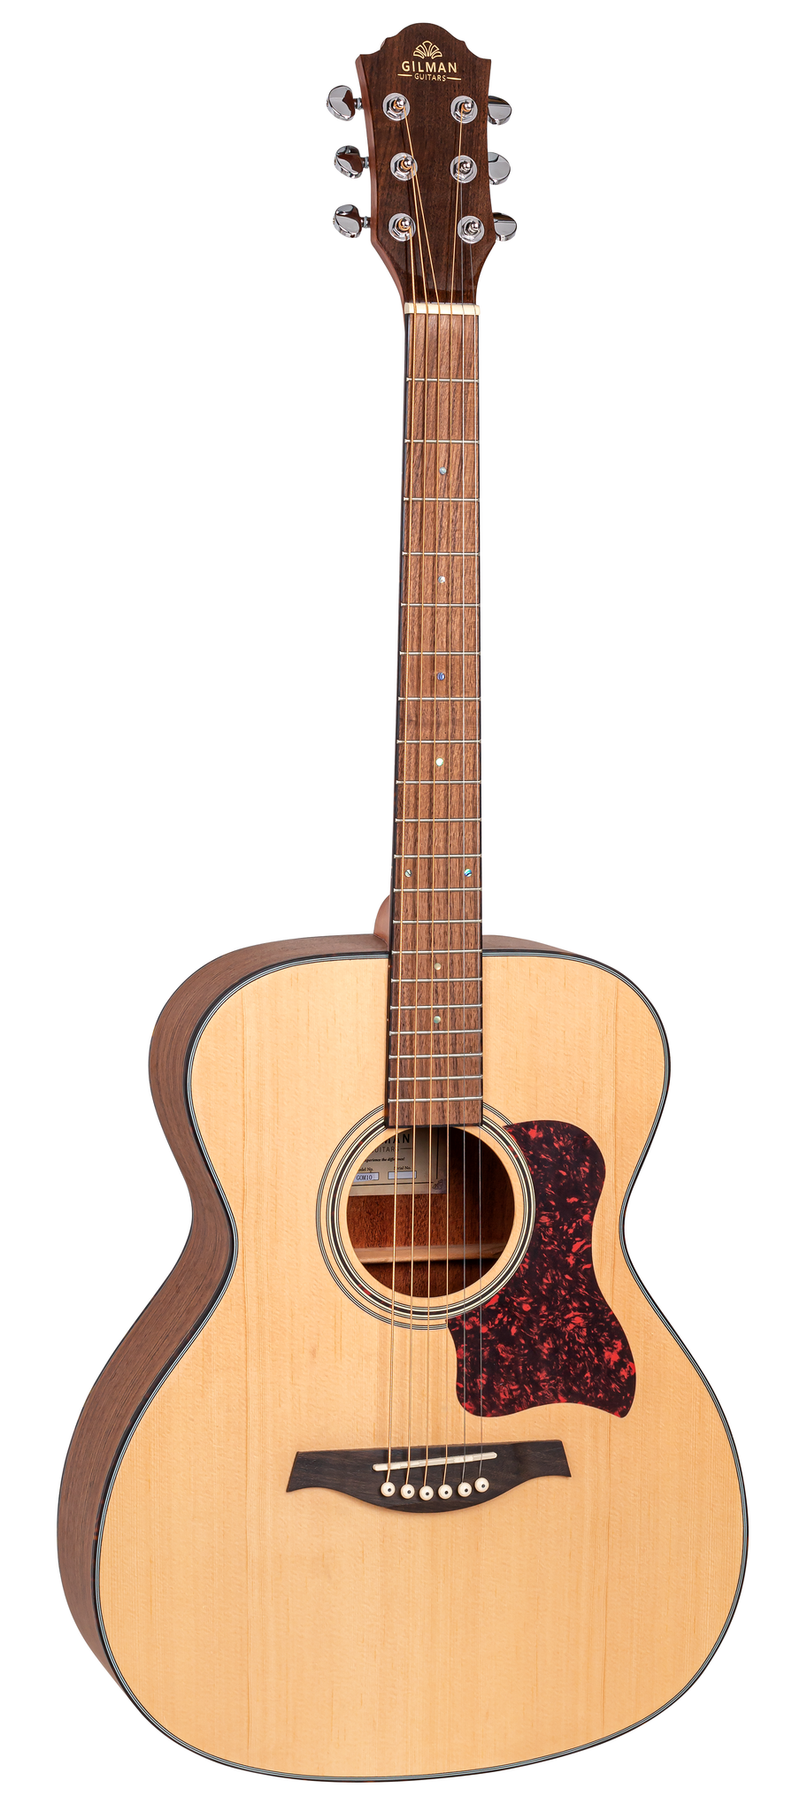 Gilman GOM10 Orchestra Acoustic Guitar at Five Star Music 102 Maroondah Highway Ringwood Melbourne Music Guitar Store.